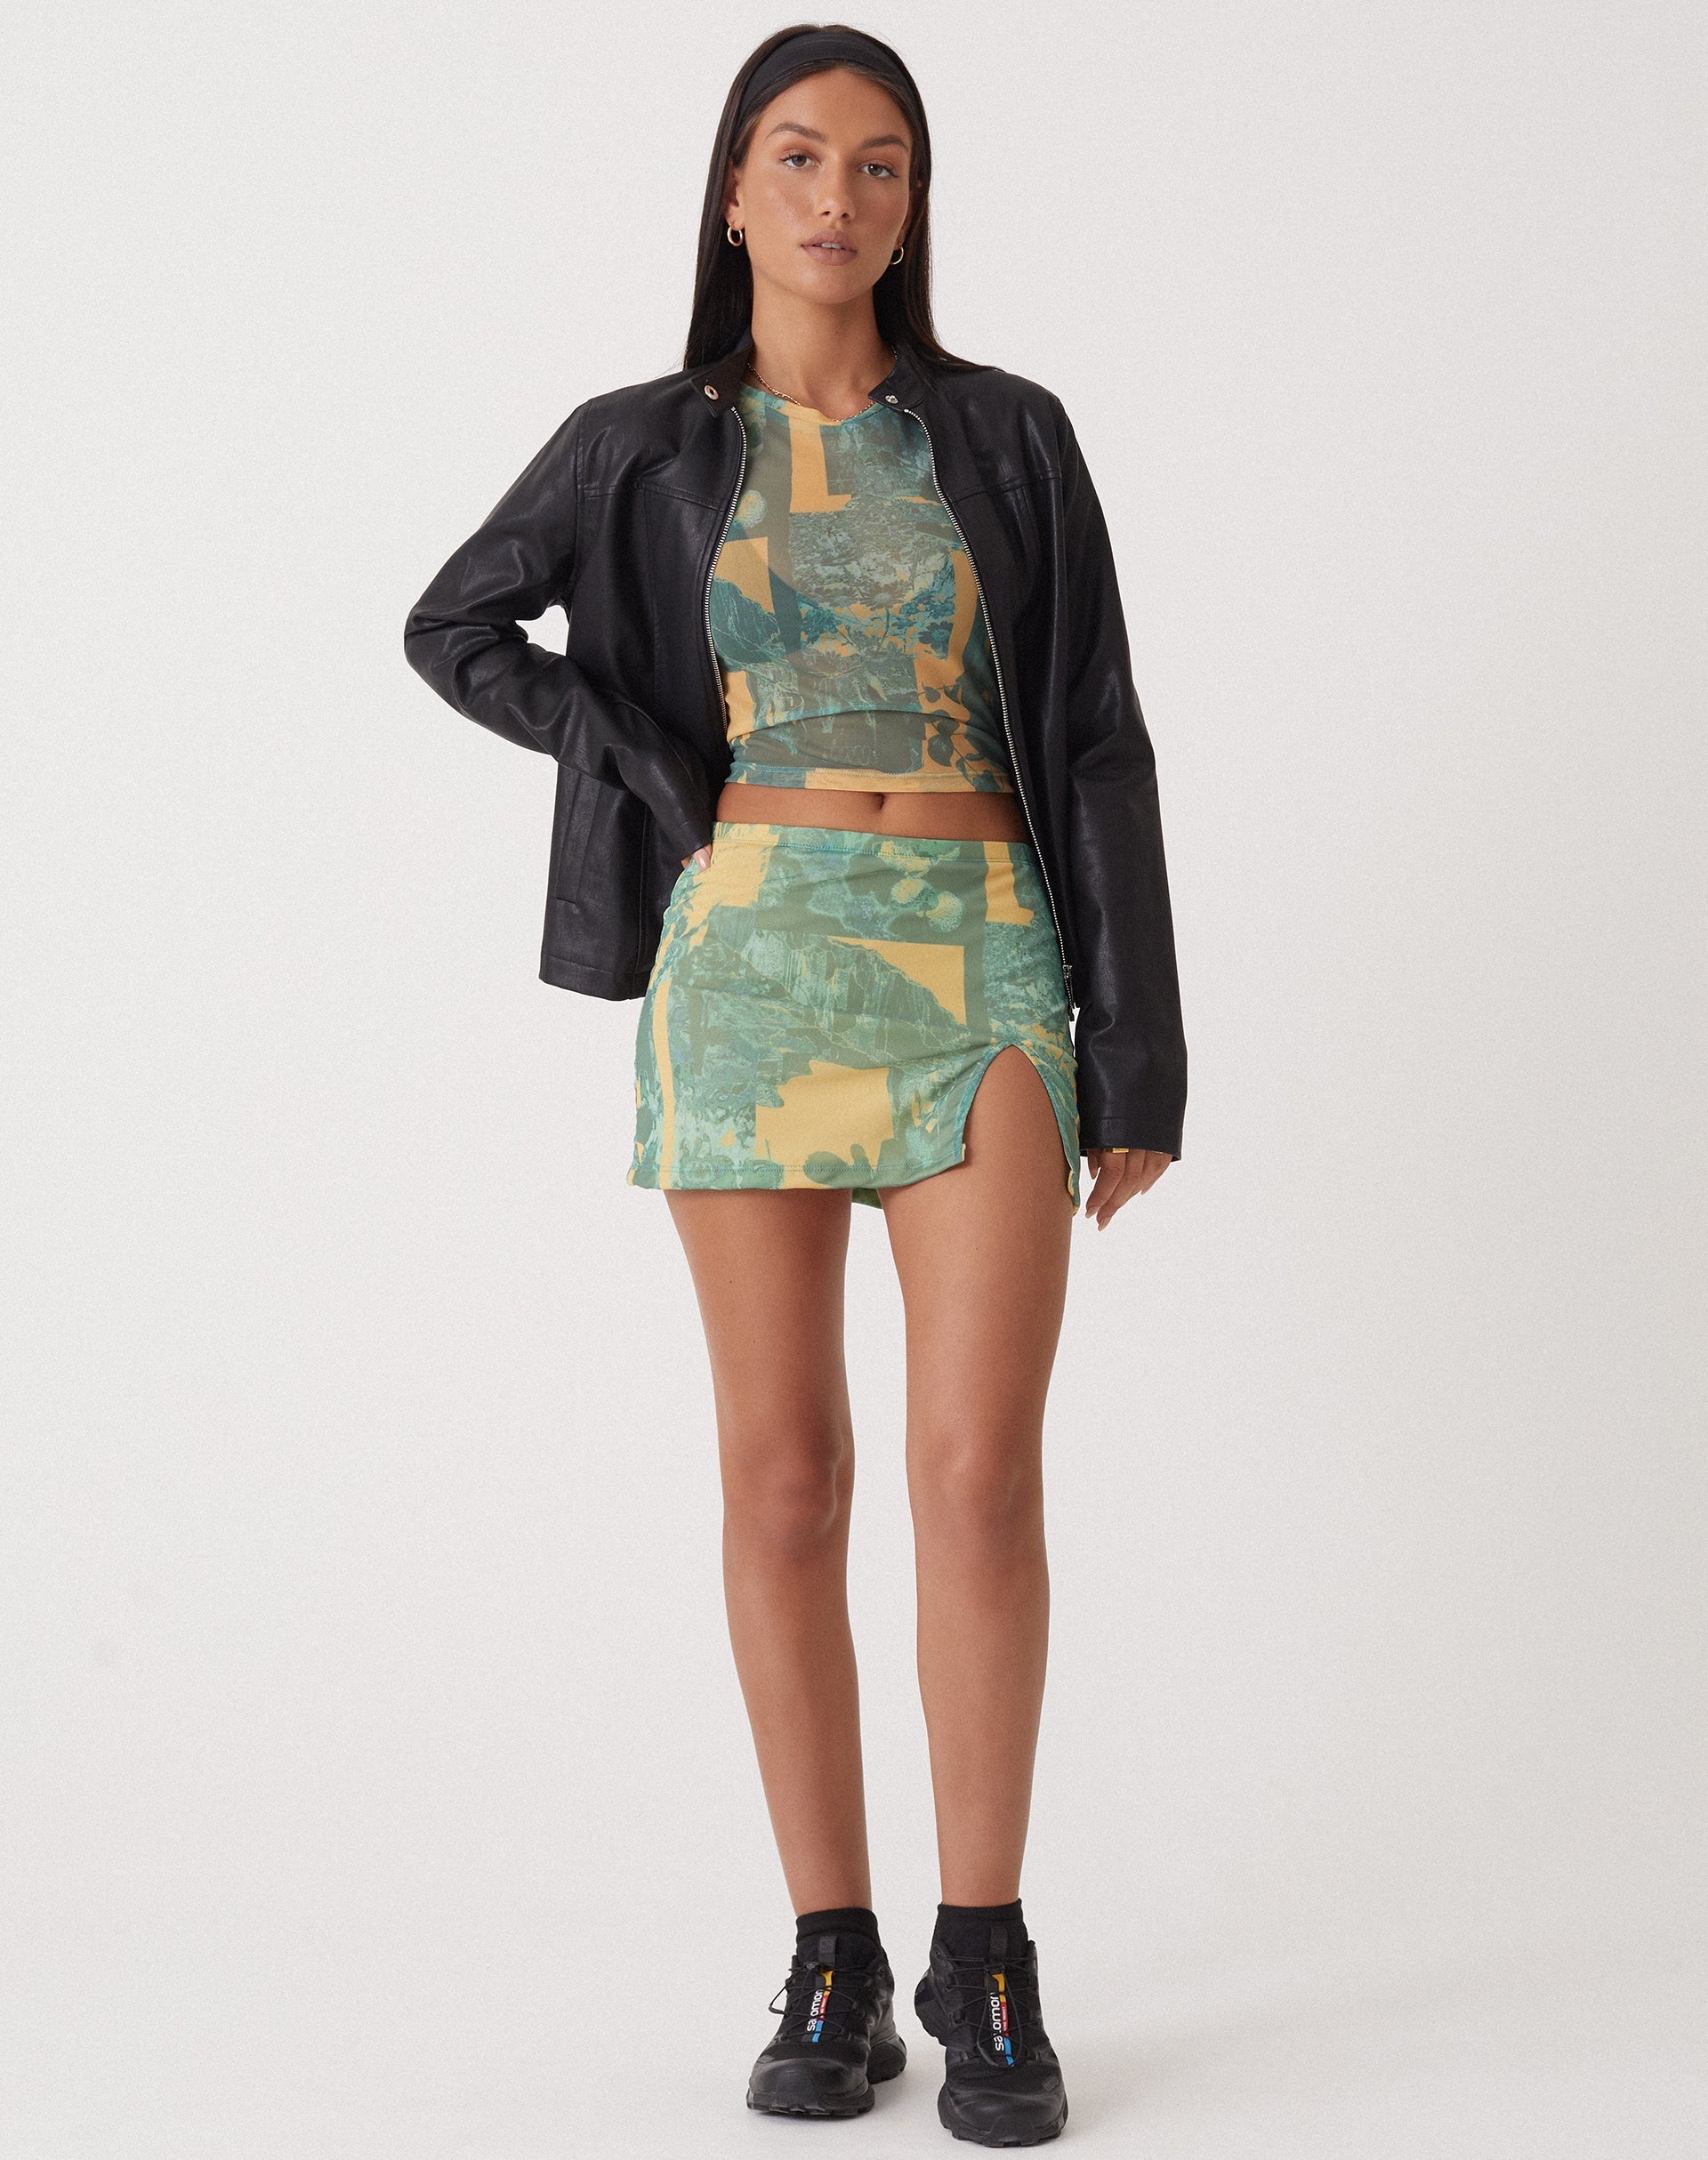 image of MOTEL X OLIVIA NEILL Pelma Mini Skirt in Collage Floral Shadow Green